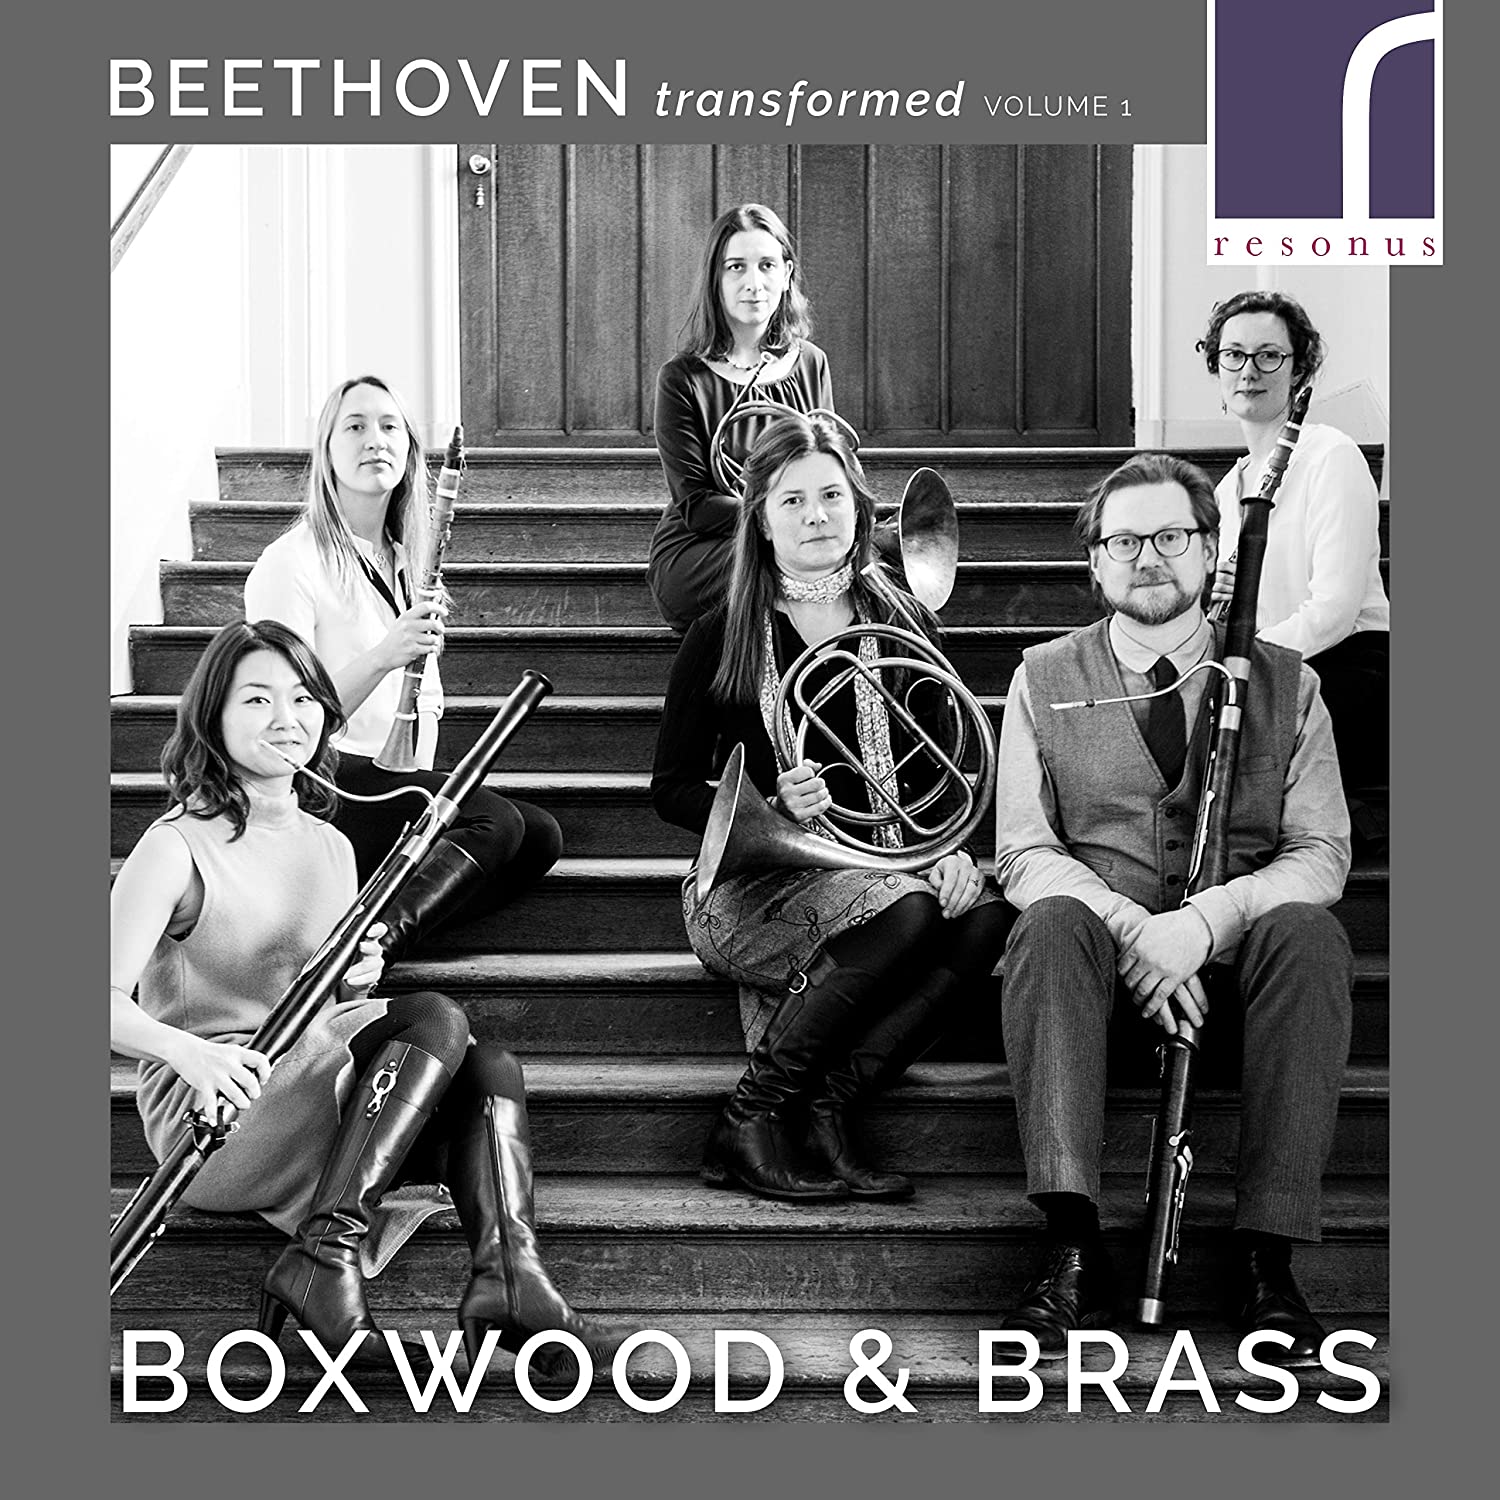 Boxwood & Brass Volume 1 of Beethoven Transformed